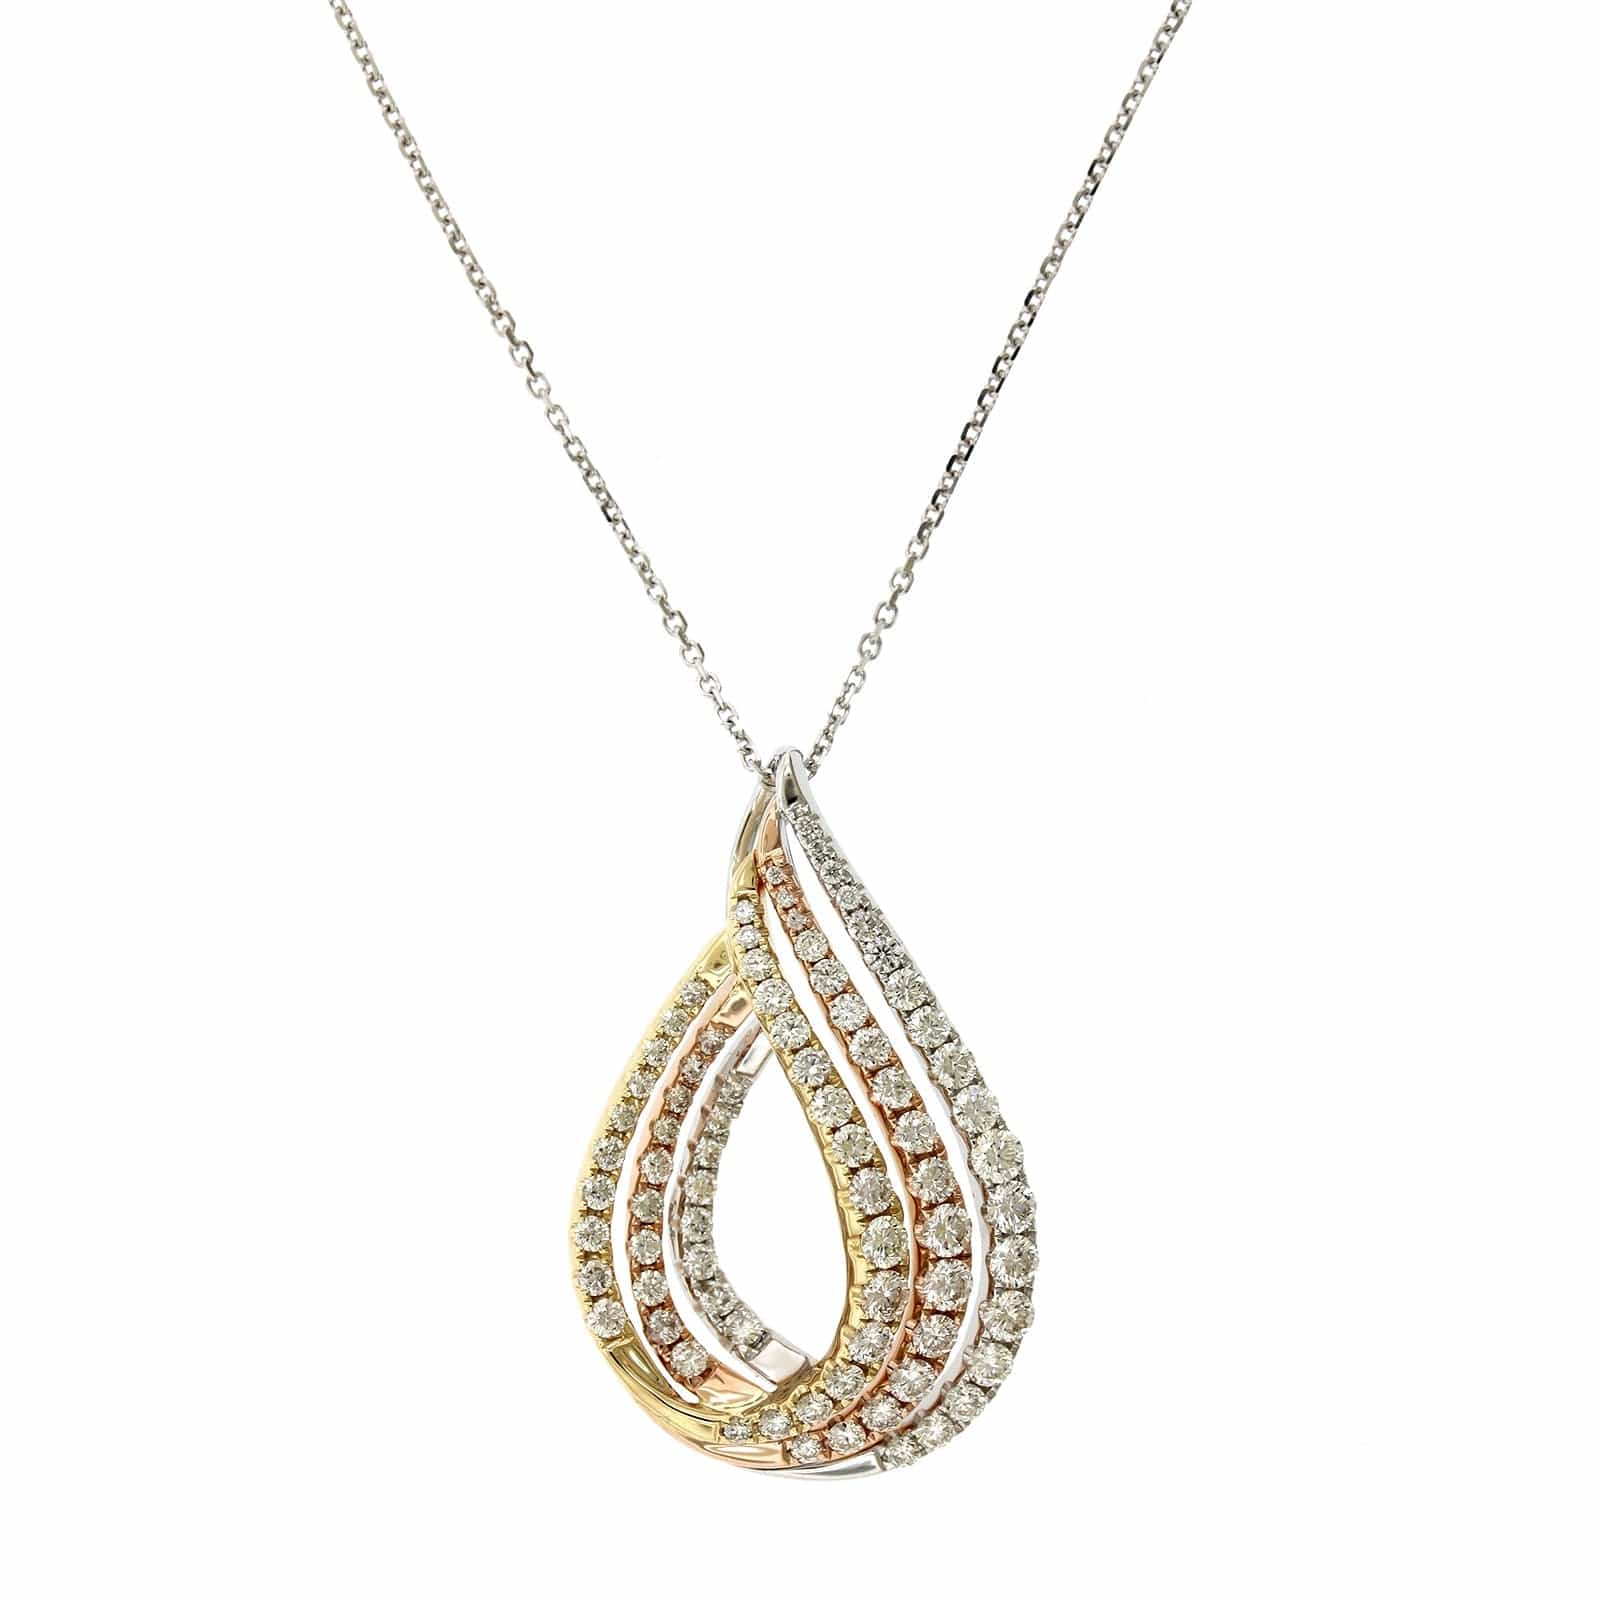 14K Tri-Color Teardrop Shape Diamond Necklace, 14k yellow, white and rose, Long's Jewelers